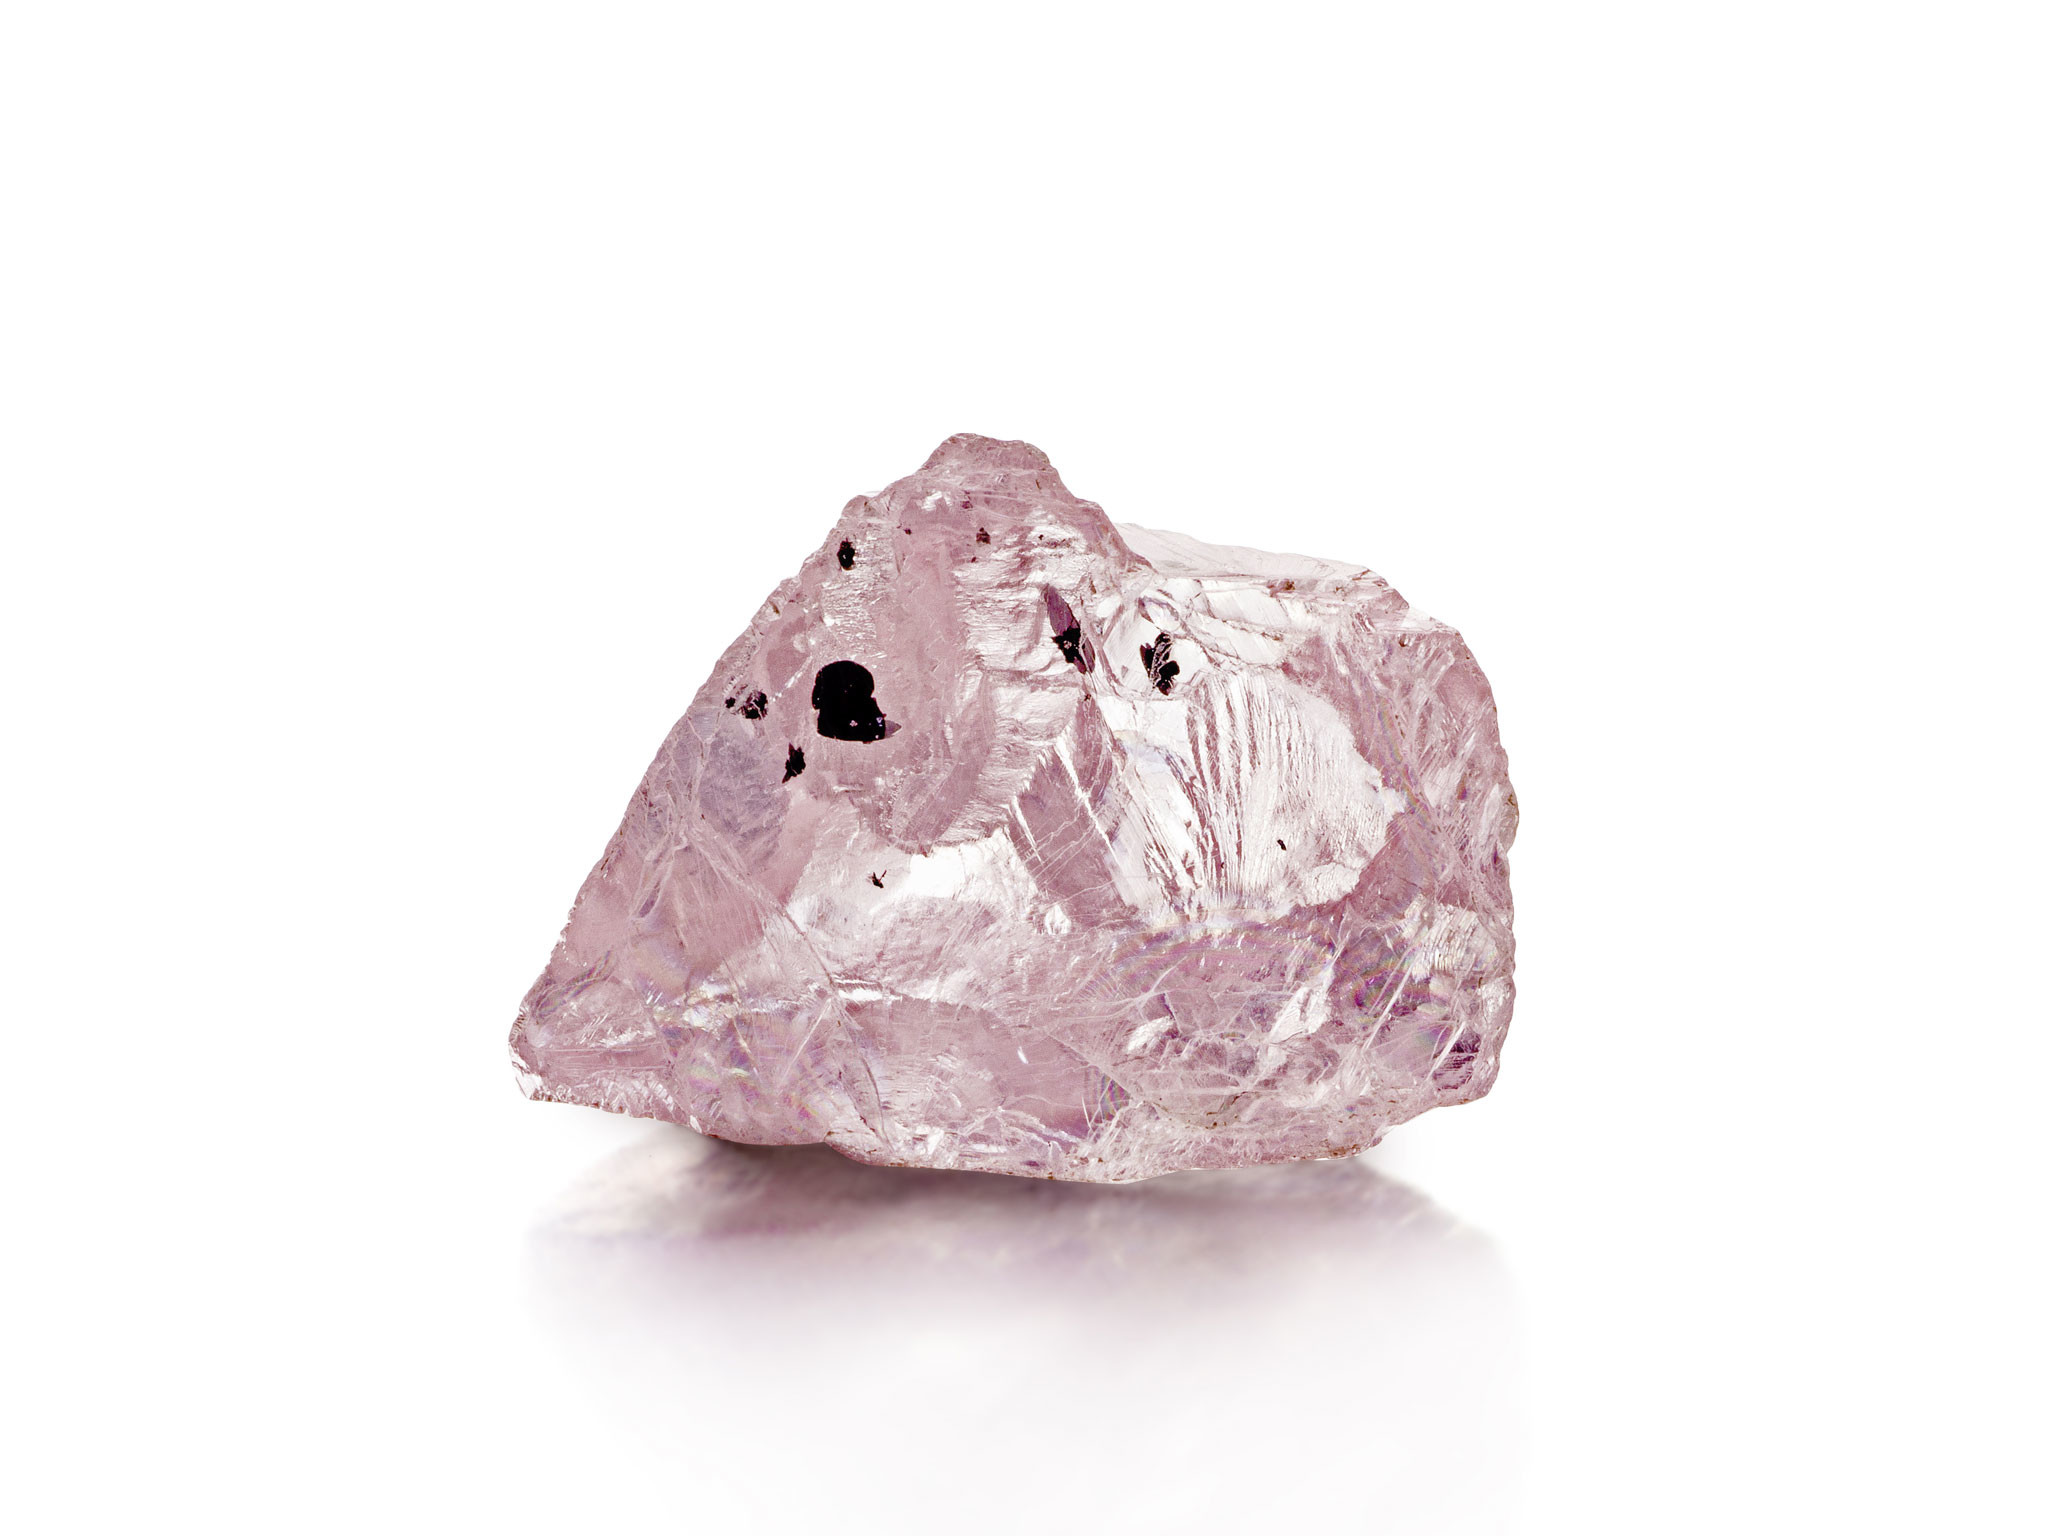 Huge 23 carat Pink diamond recovered by Petra in Tanzania The Independent